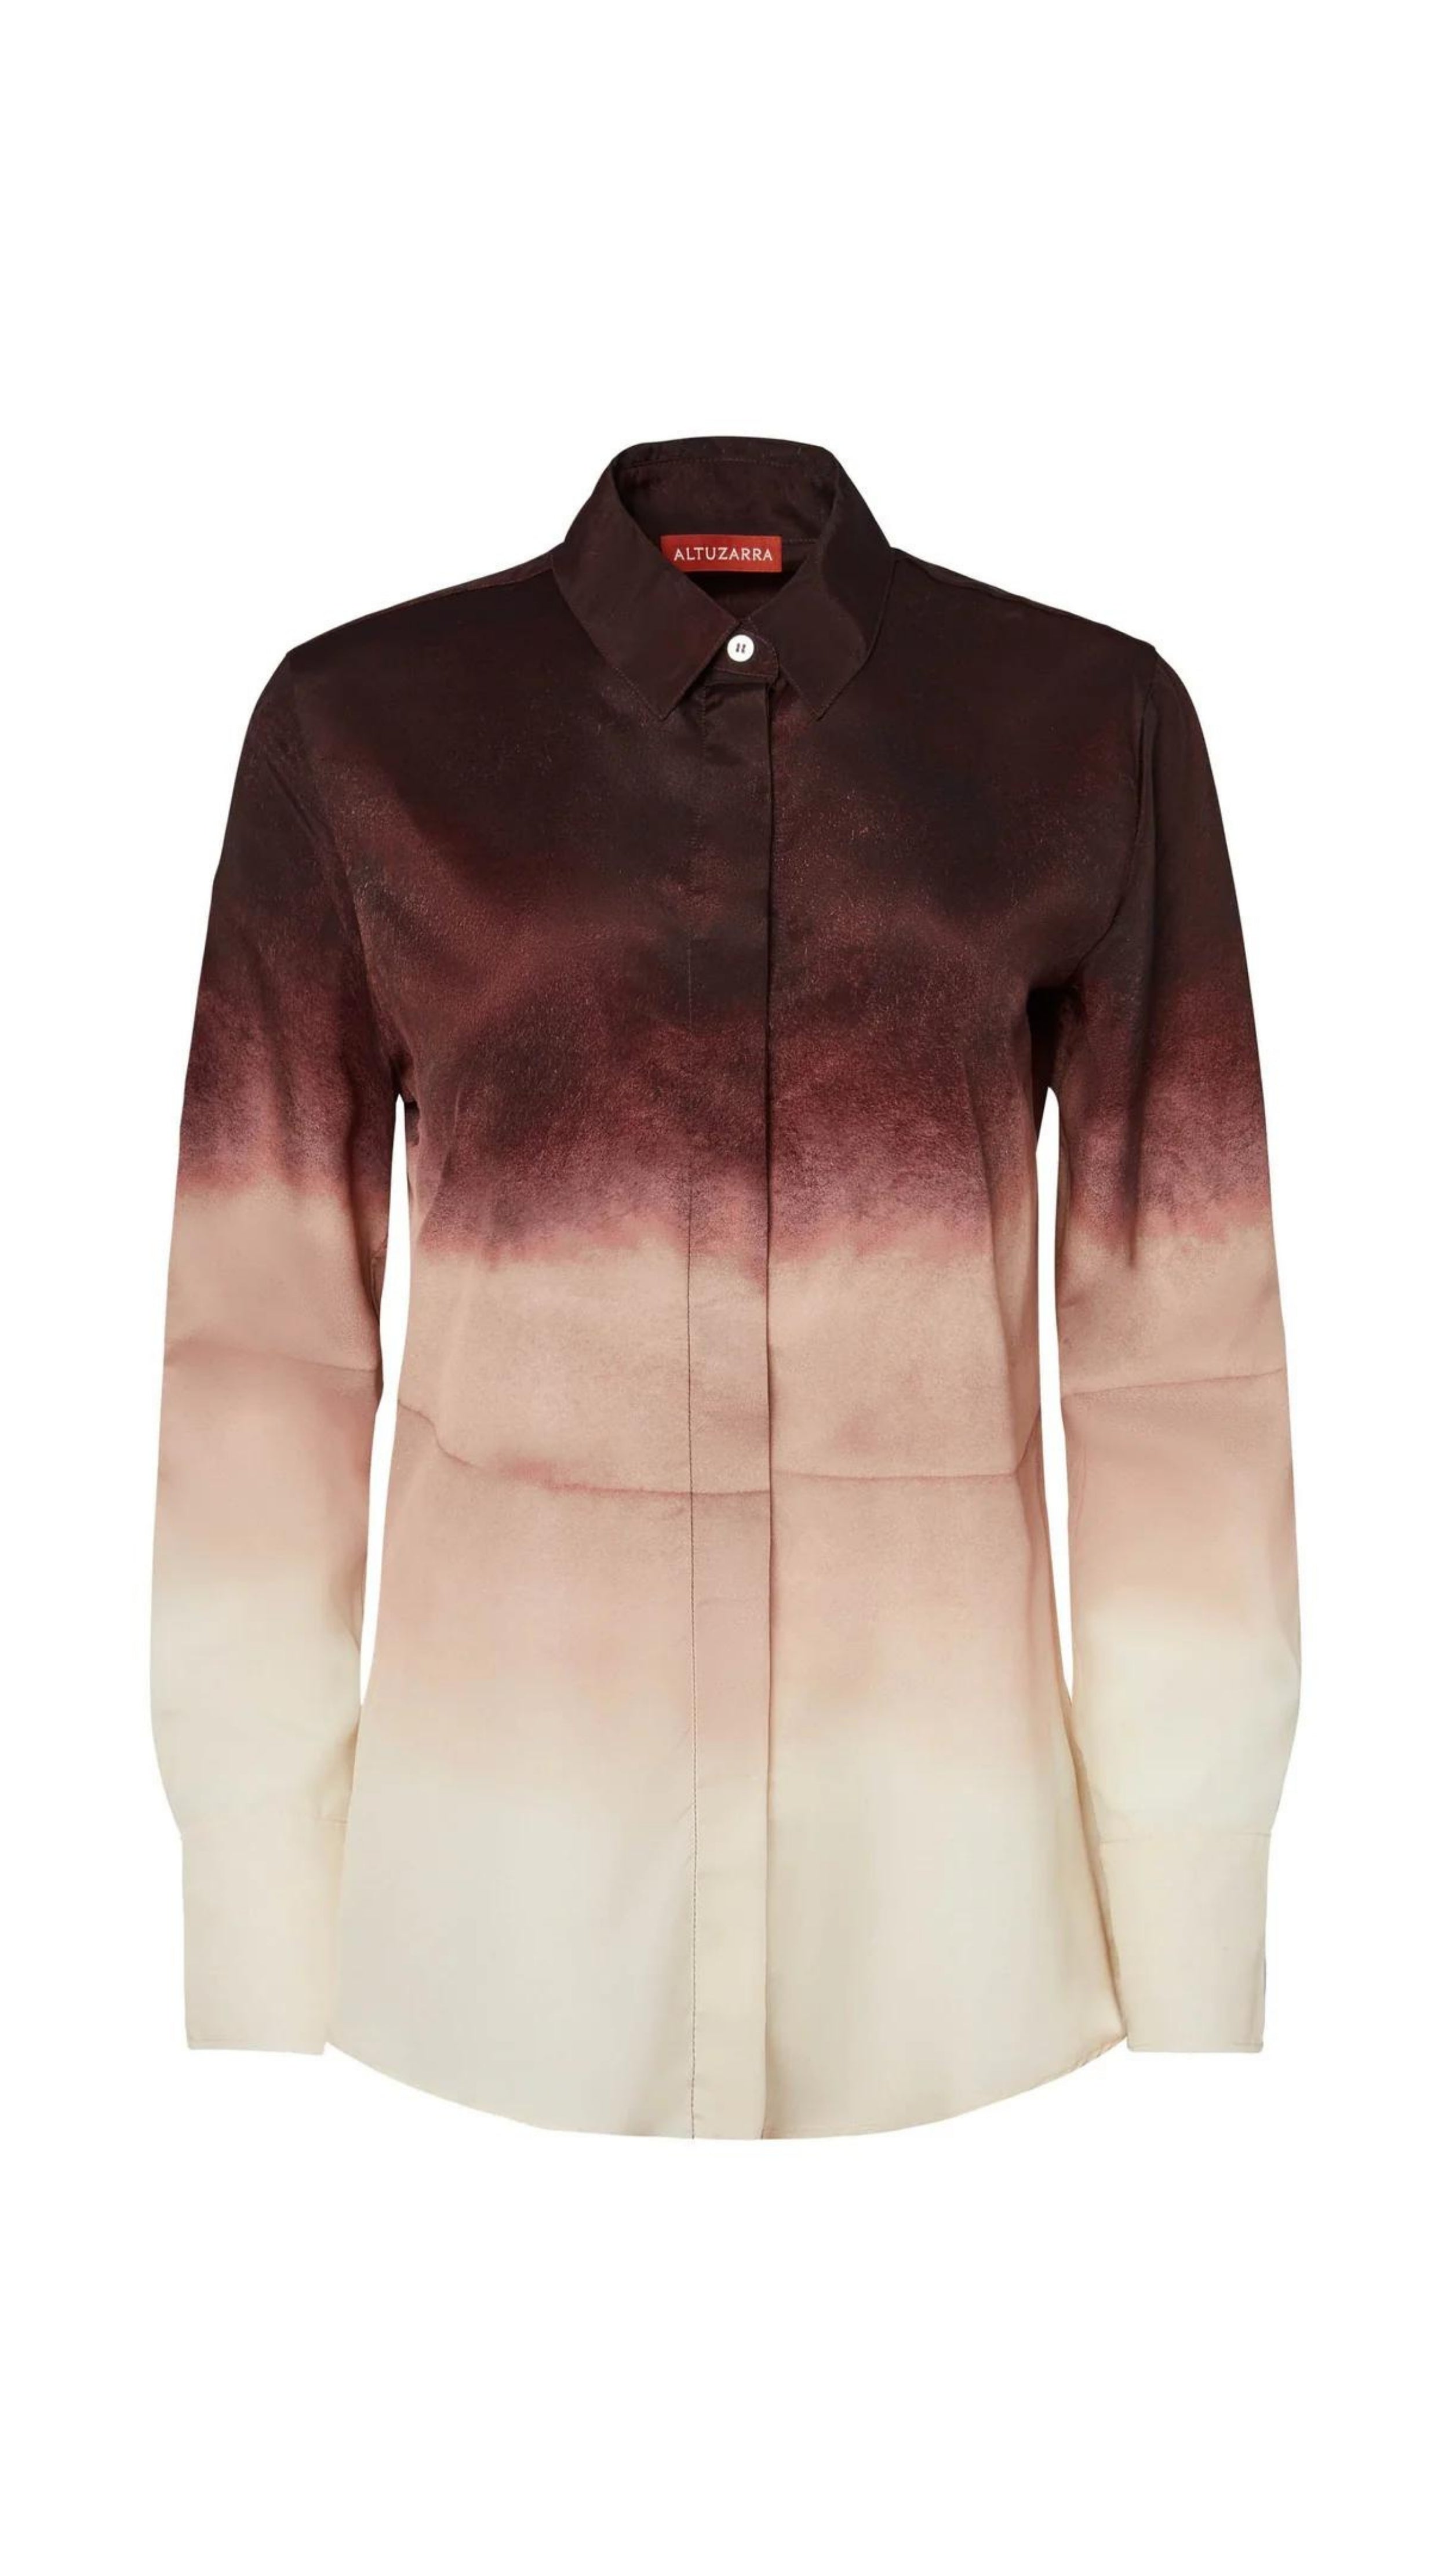 Altuzarra The Chika Top is crafted from Italian silk in an elegant cranberry to ivory dip dye ombre. The classic style button down shirt features a small point collar, concealed button front closure, and long cuffed sleeves. Product photo shown from front.